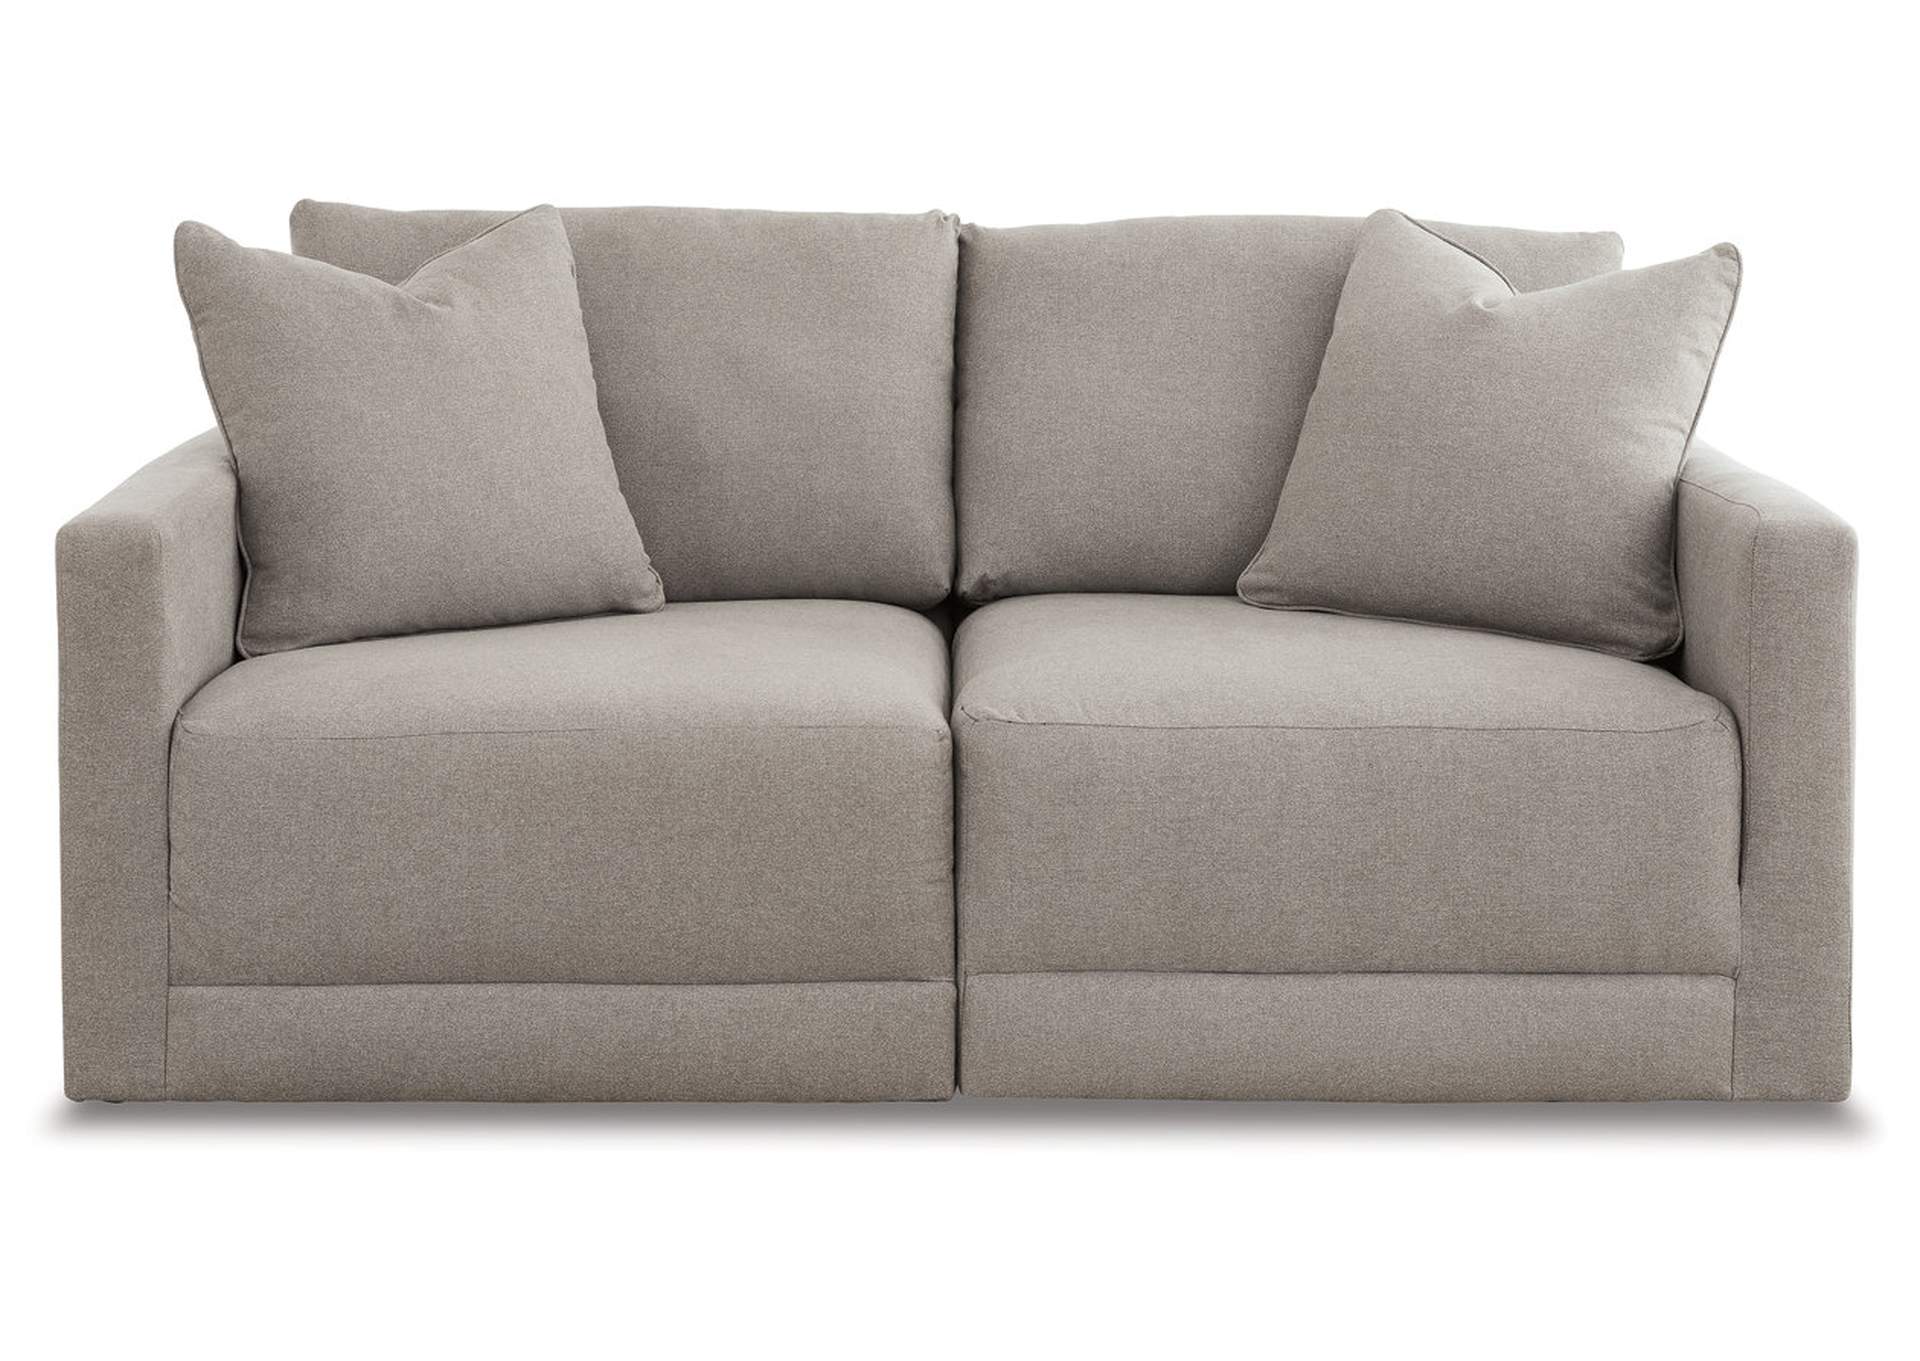 Katany 2-Piece Sectional Ivan Furniture